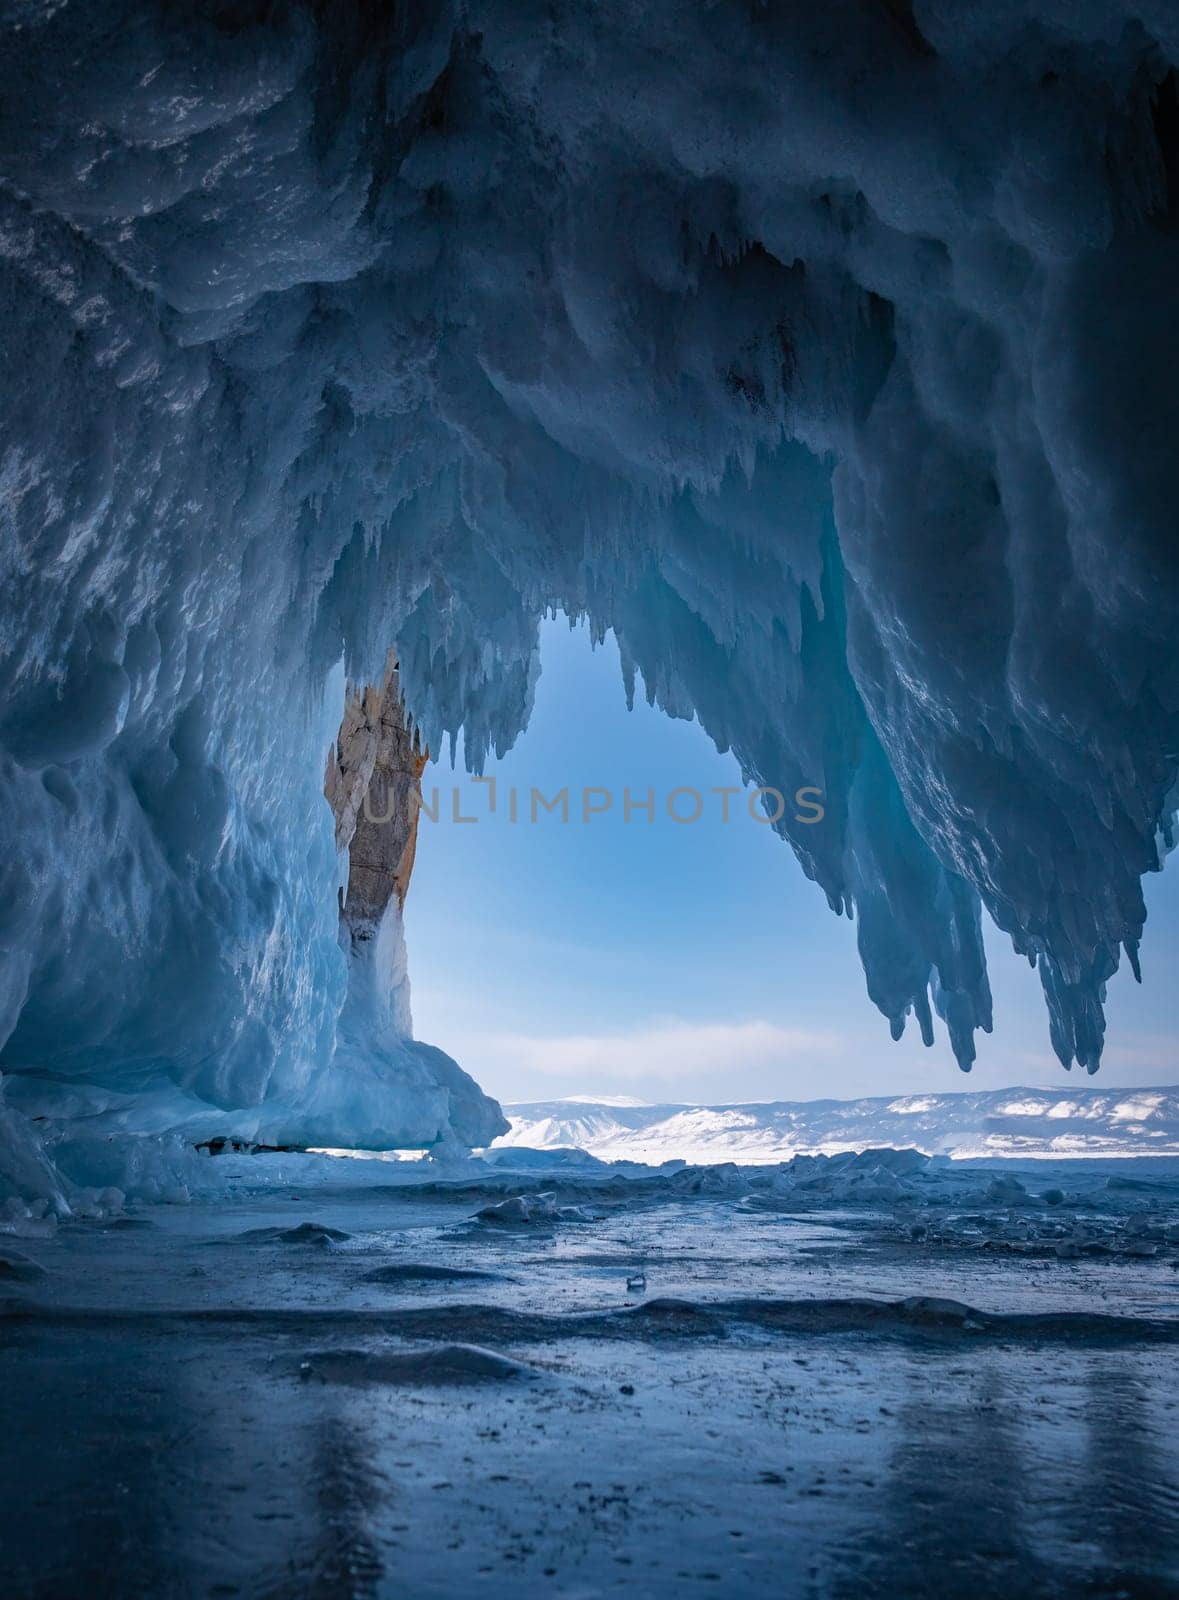 Inside a stunning ice cave on Lake Baikal, large icicles hang from the ceiling, creating a breathtaking winter landscape. Snow-covered mountains can be seen far in the distance. by Busker